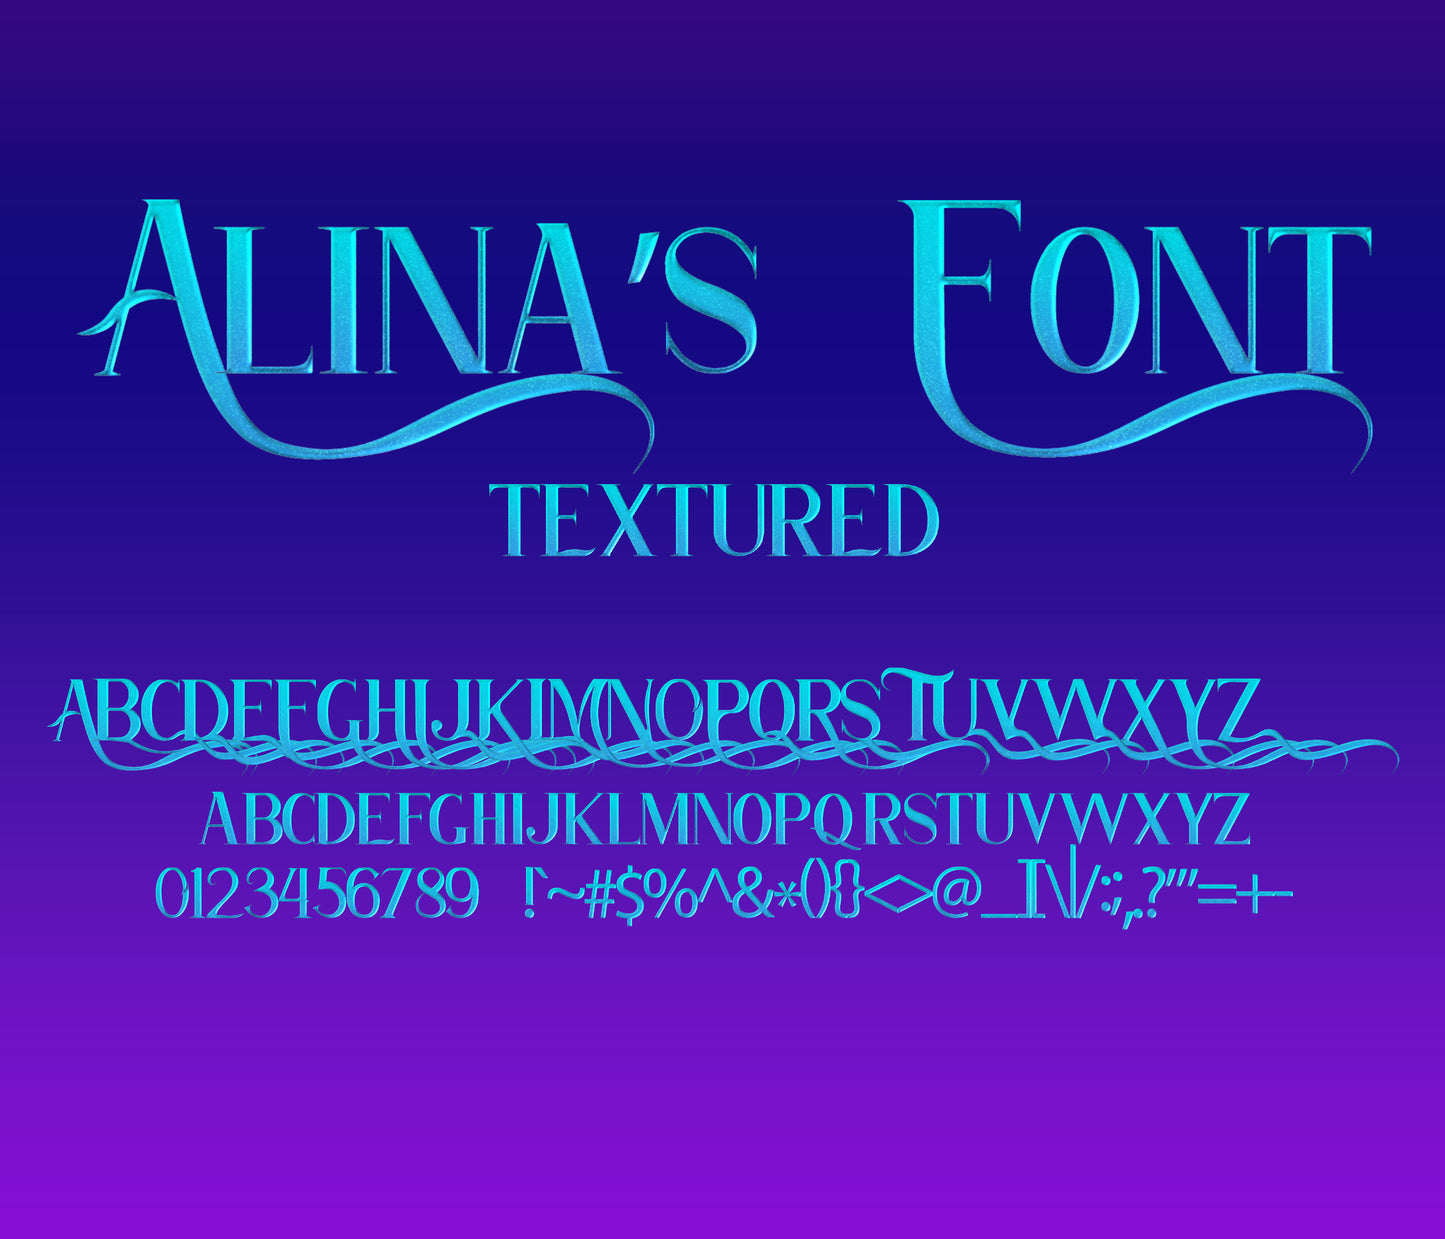 Little Mermaid Waves: Alina's Textured Font for Sea-Inspired Crafts